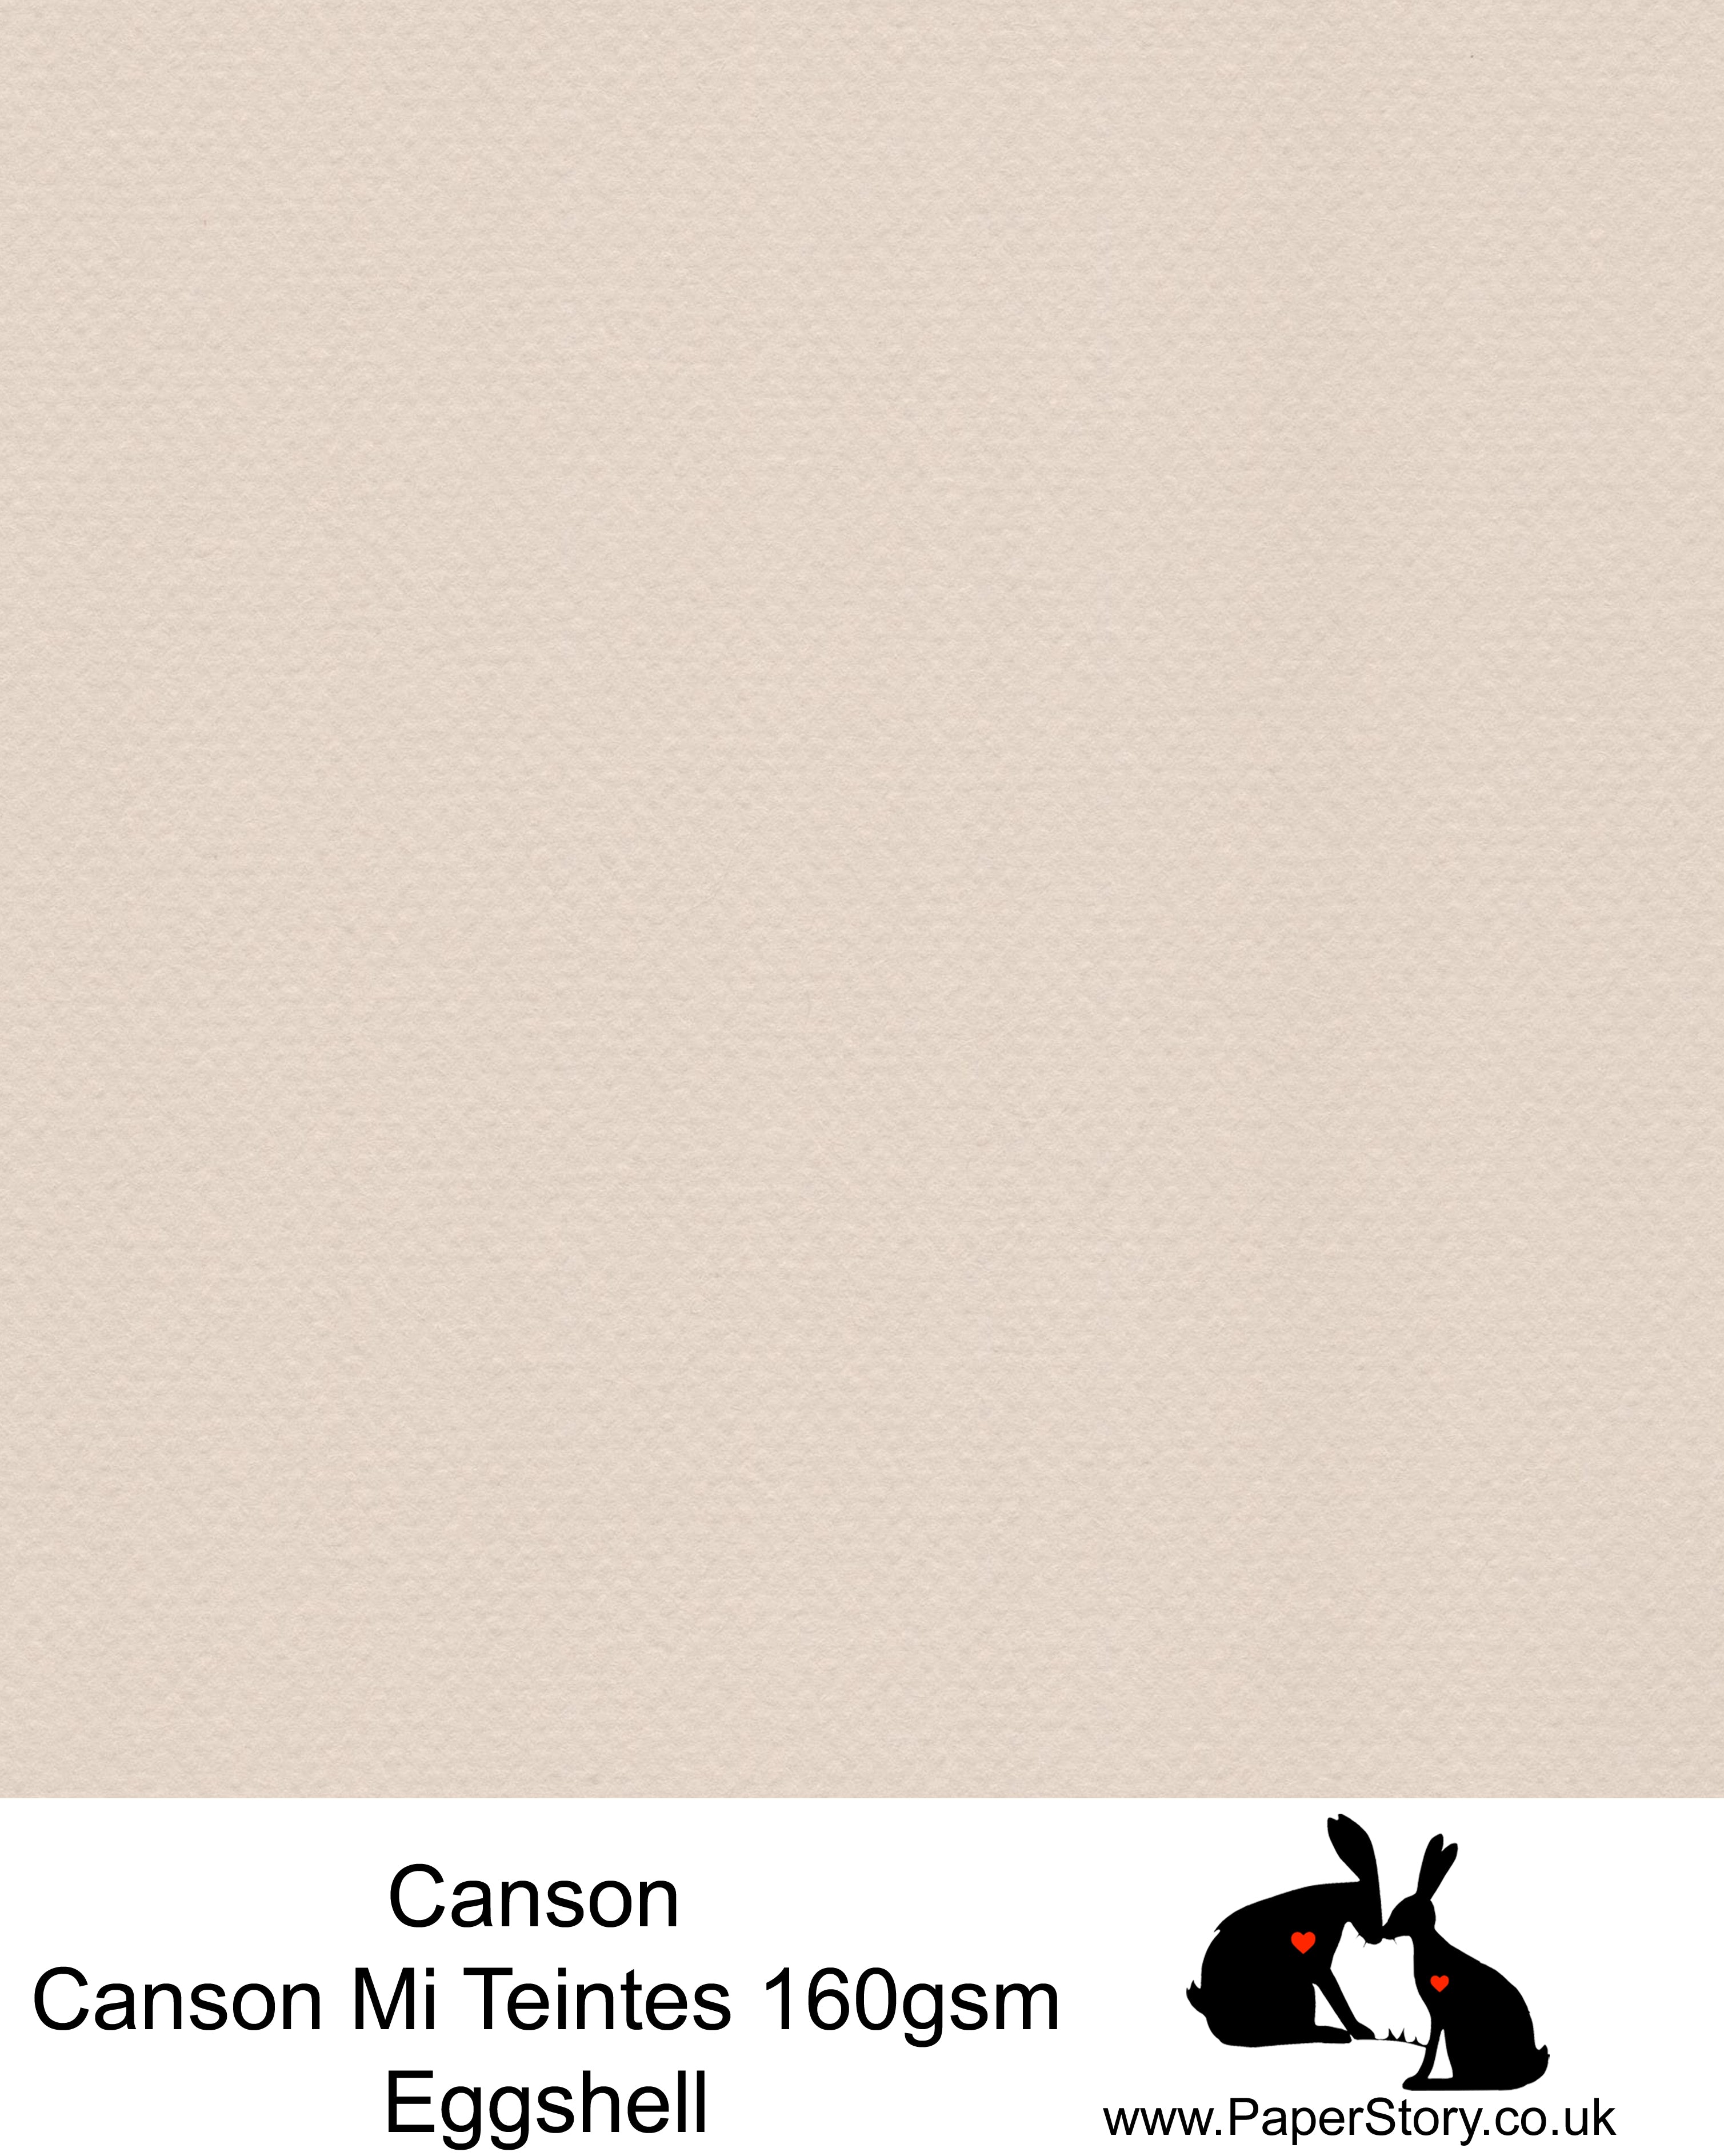 Canson Mi Teintes acid free, Eggshell deep Ivory hammered texture honeycomb surface paper 160 gsm. This is a popular and classic paper for all artists especially well respected for Pastel  and Papercutting made famous by Paper Panda. This paper has a honeycombed finish one side and fine grain the other. An authentic art paper, acid free with a  very high 50% cotton content. Canson Mi-Teintes complies with the ISO 9706 standard on permanence, a guarantee of excellent conservation  